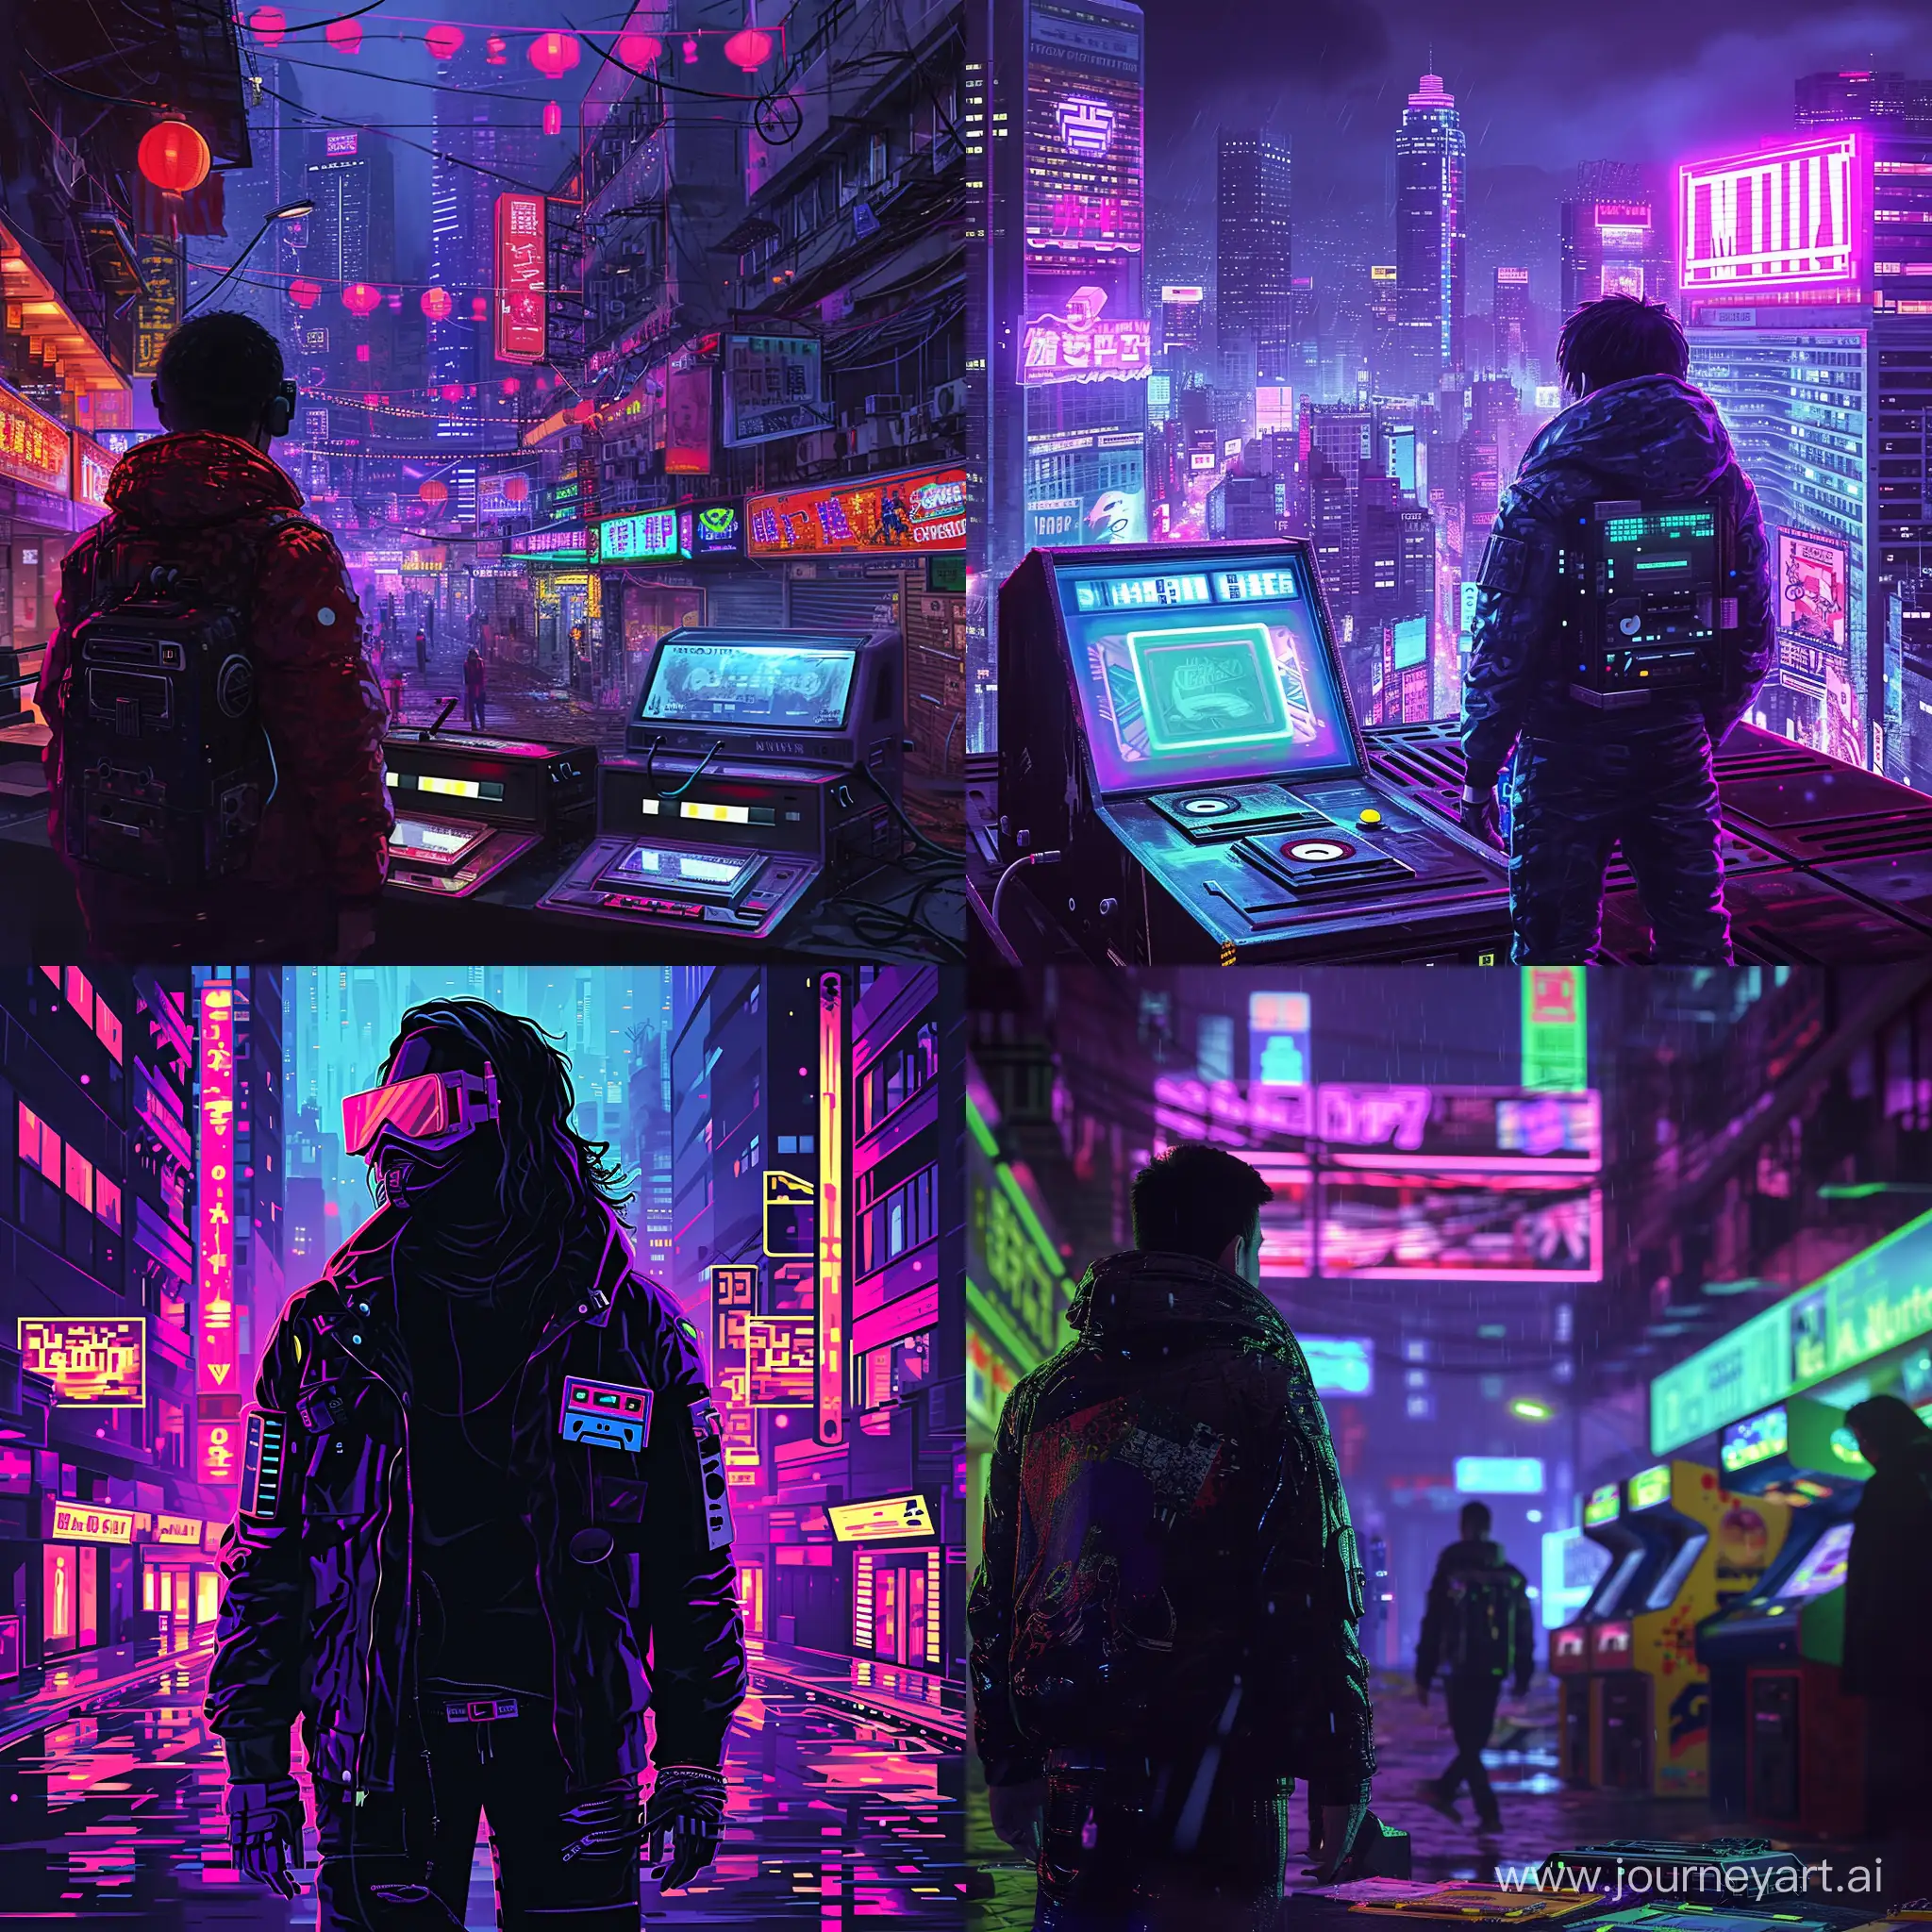 Renegade-Hacker-in-Neon-Cyberpunk-City-with-Sentient-AI-and-Time-Travel-Conspiracy